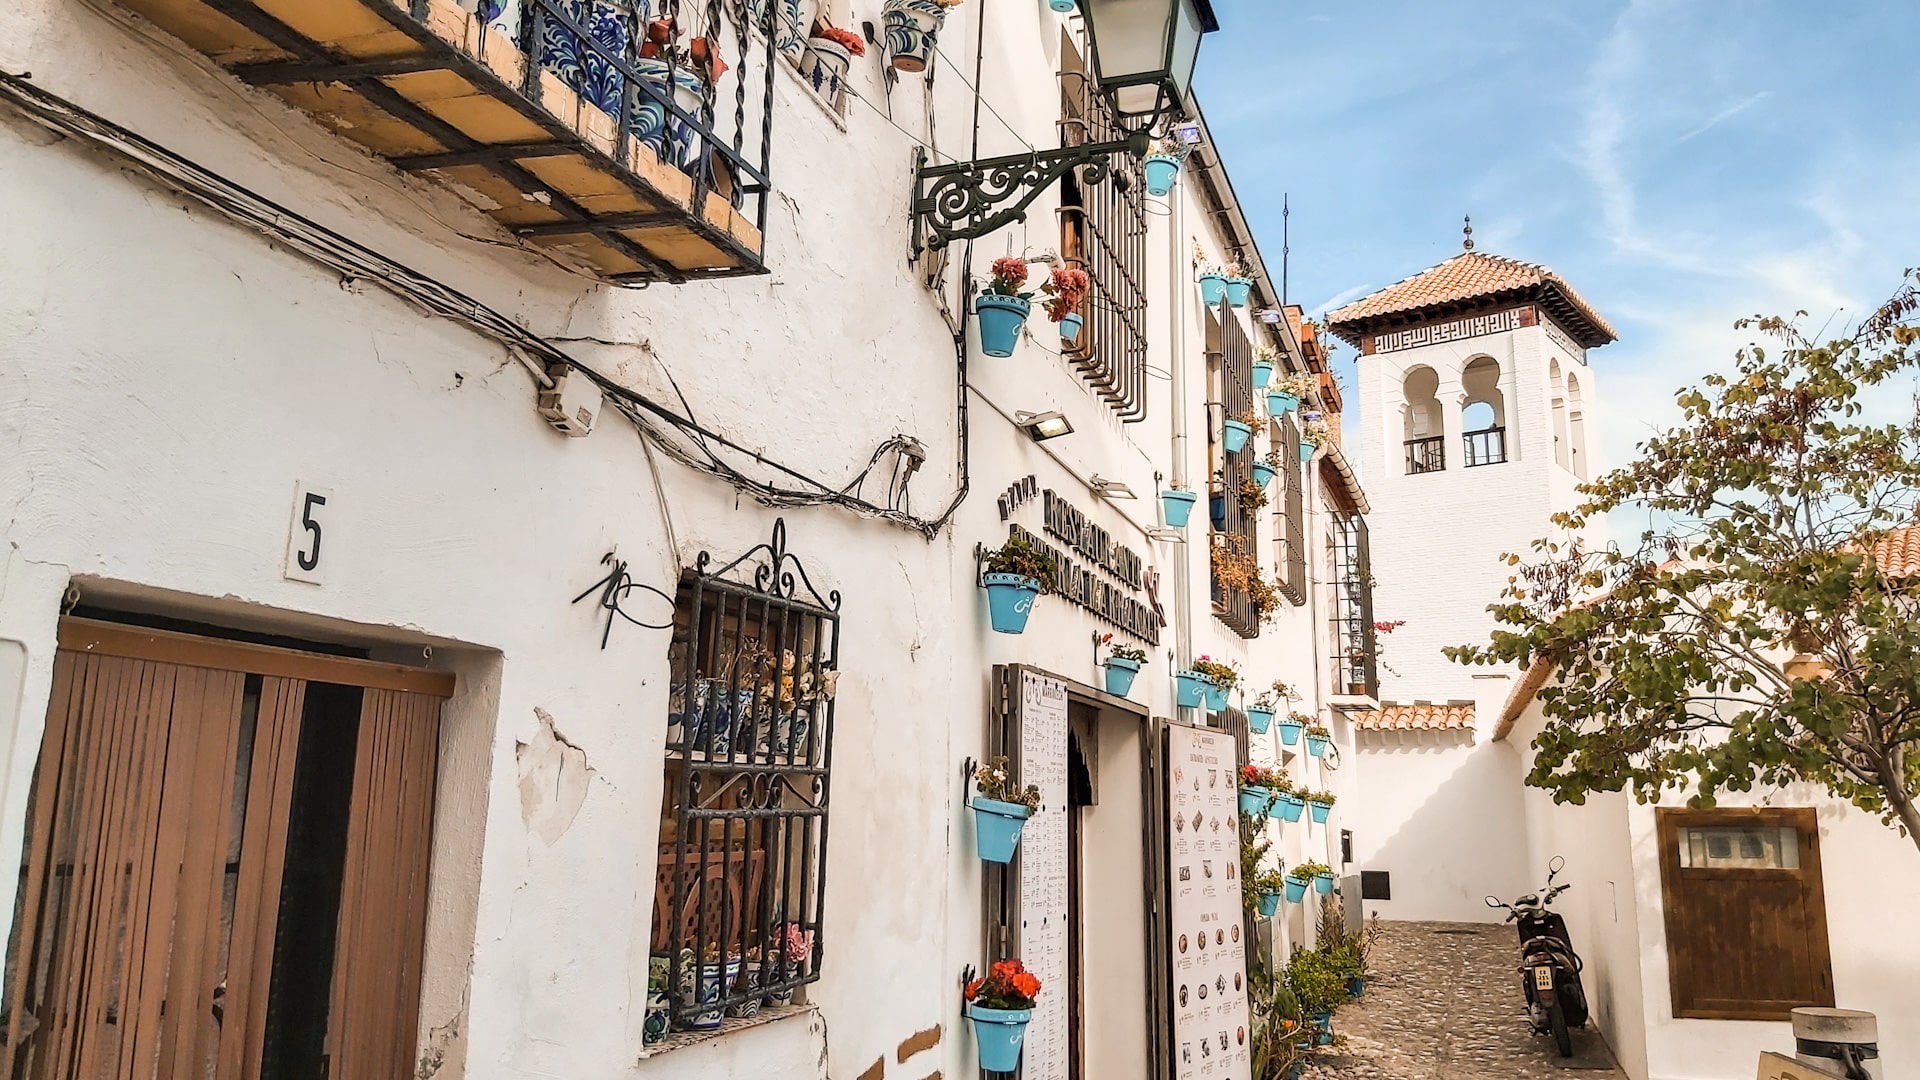 Albaicín is known for its narrow winding streets, whitewashed houses, and views of the Alhambra complex.